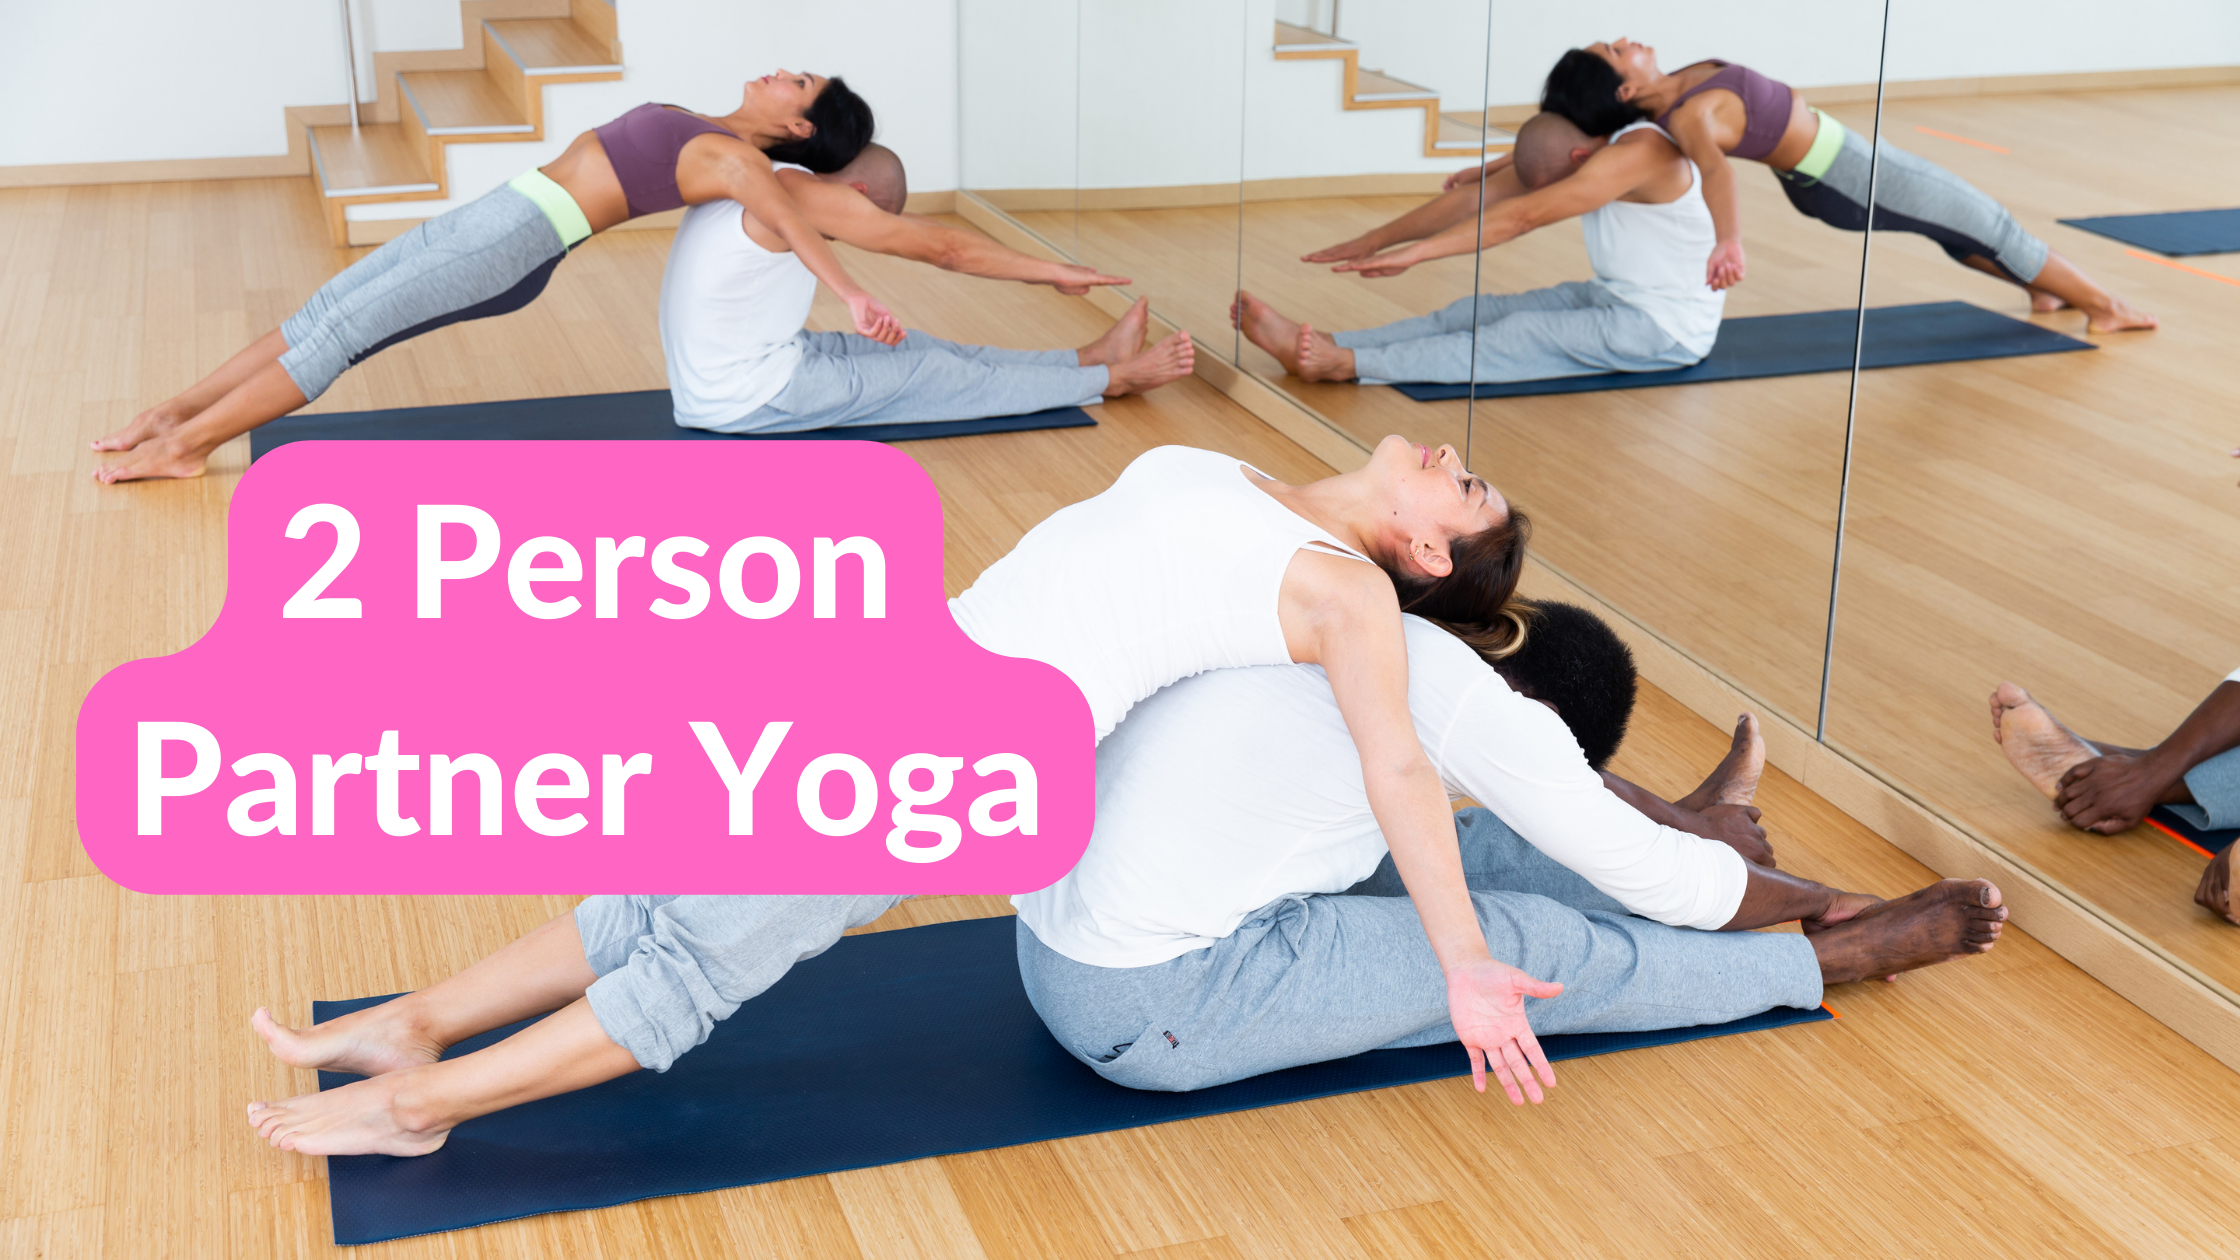 10 Easy Yoga Poses for Beginners to Improve Flexibility and Reduce Stress |  Longevity